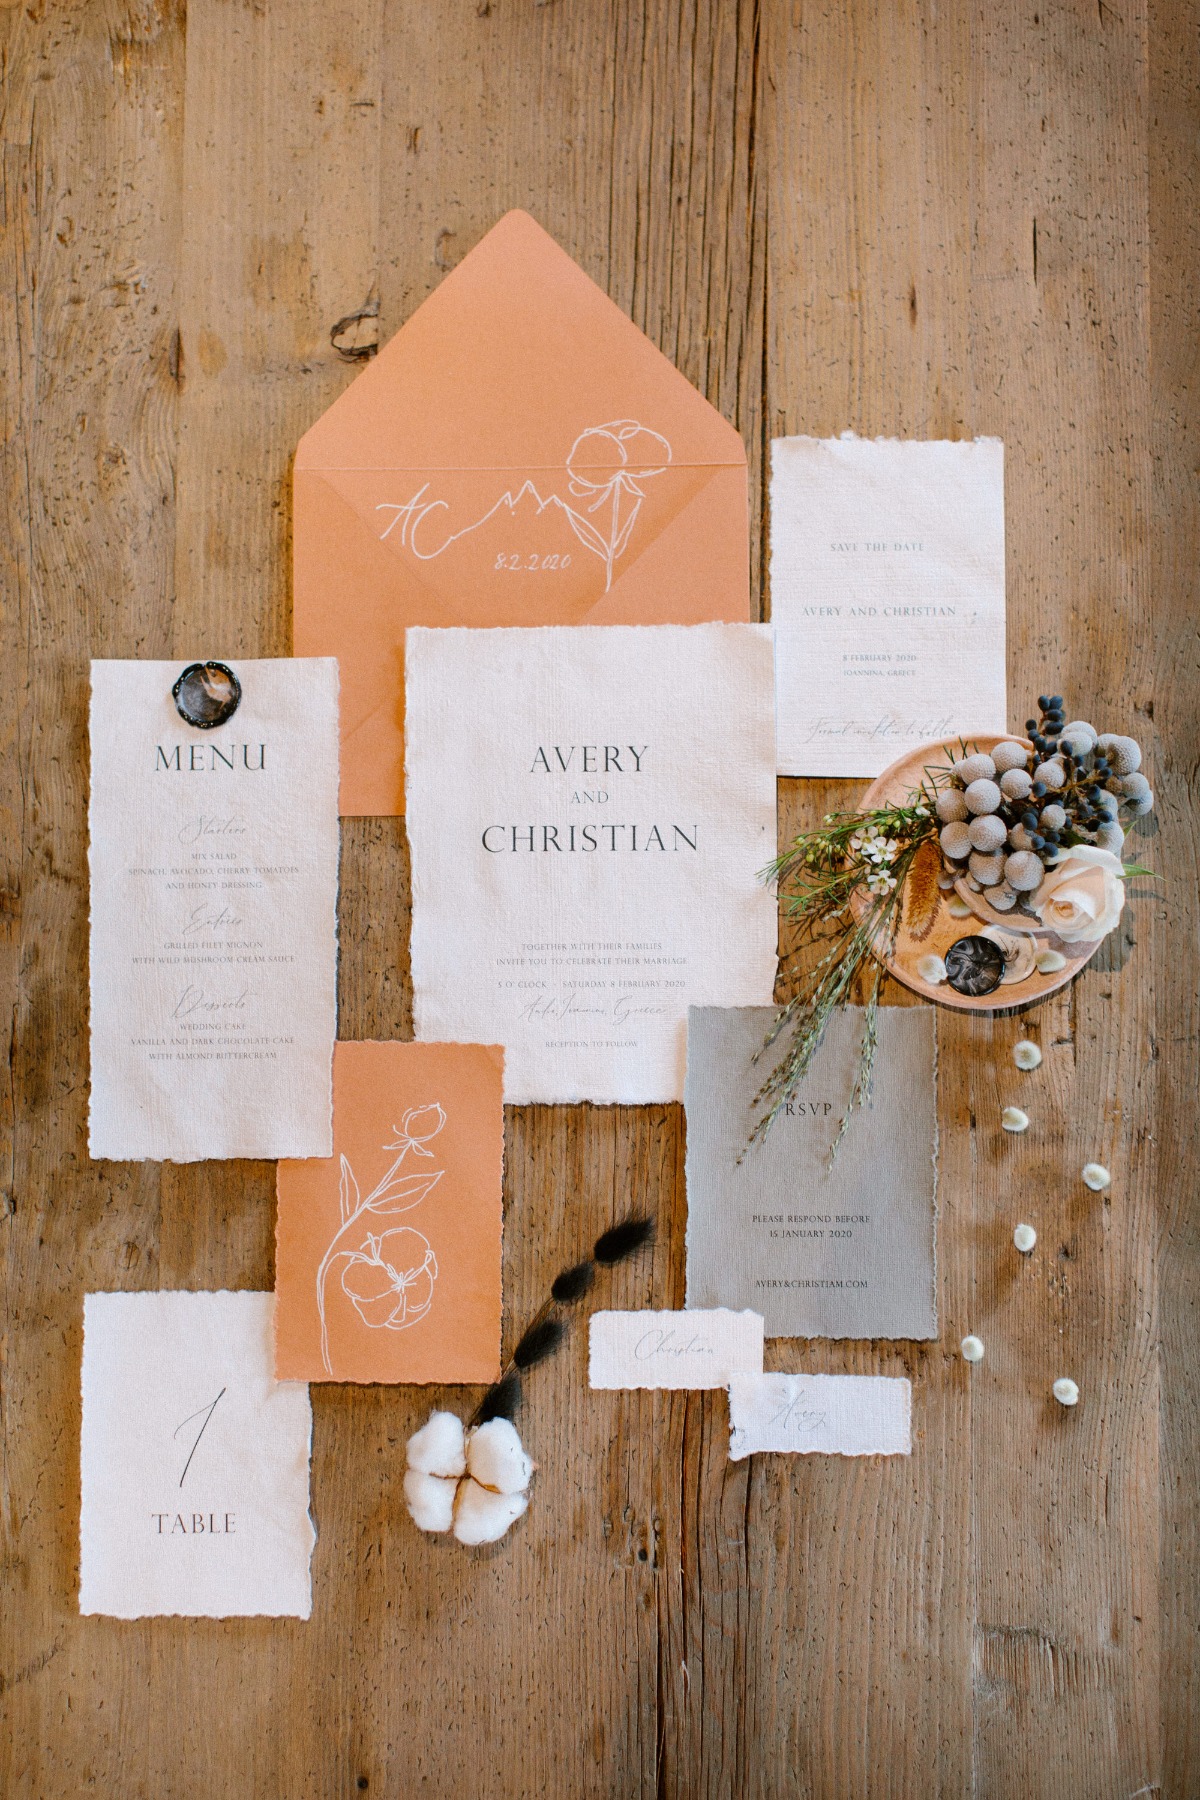 Flat lay styling ideas for wedding invitations